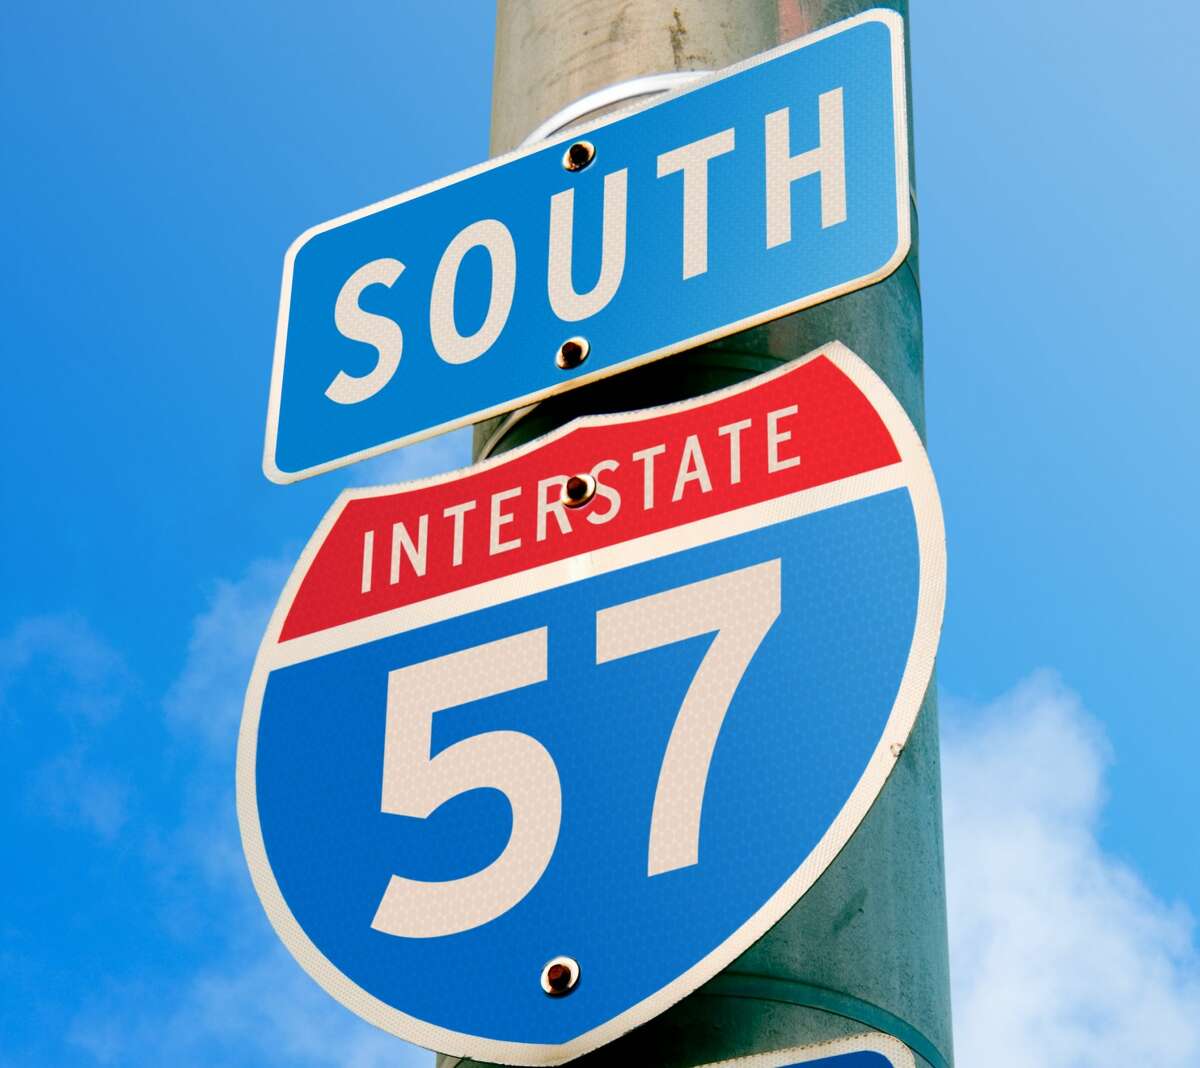 A photo of a sign for Interstate 57 in Illinois